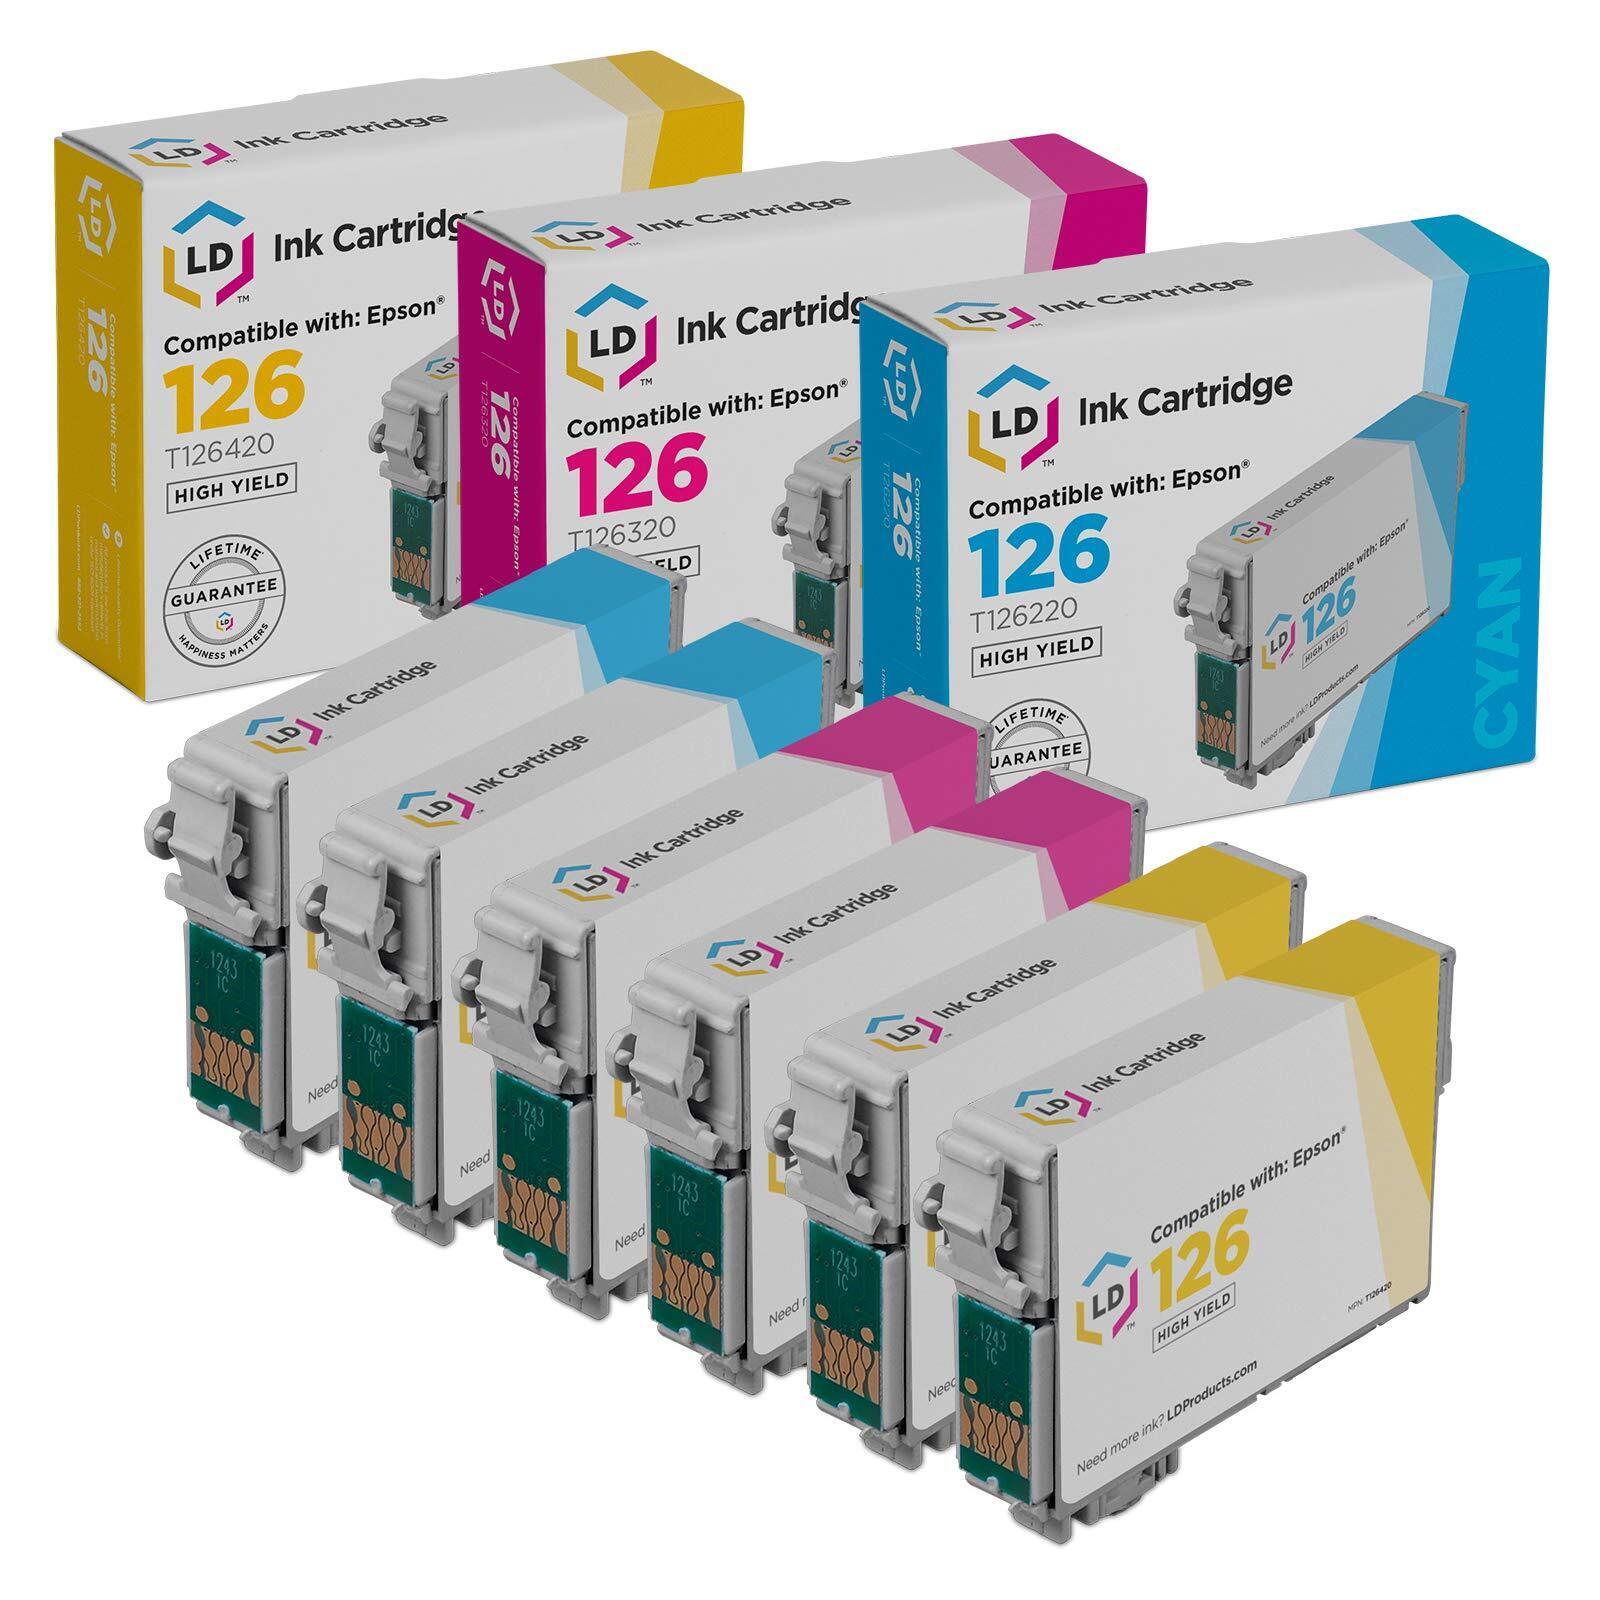 LD Products 6PK Replacement for Epson 126 High Yield Color Ink Cartridge Set